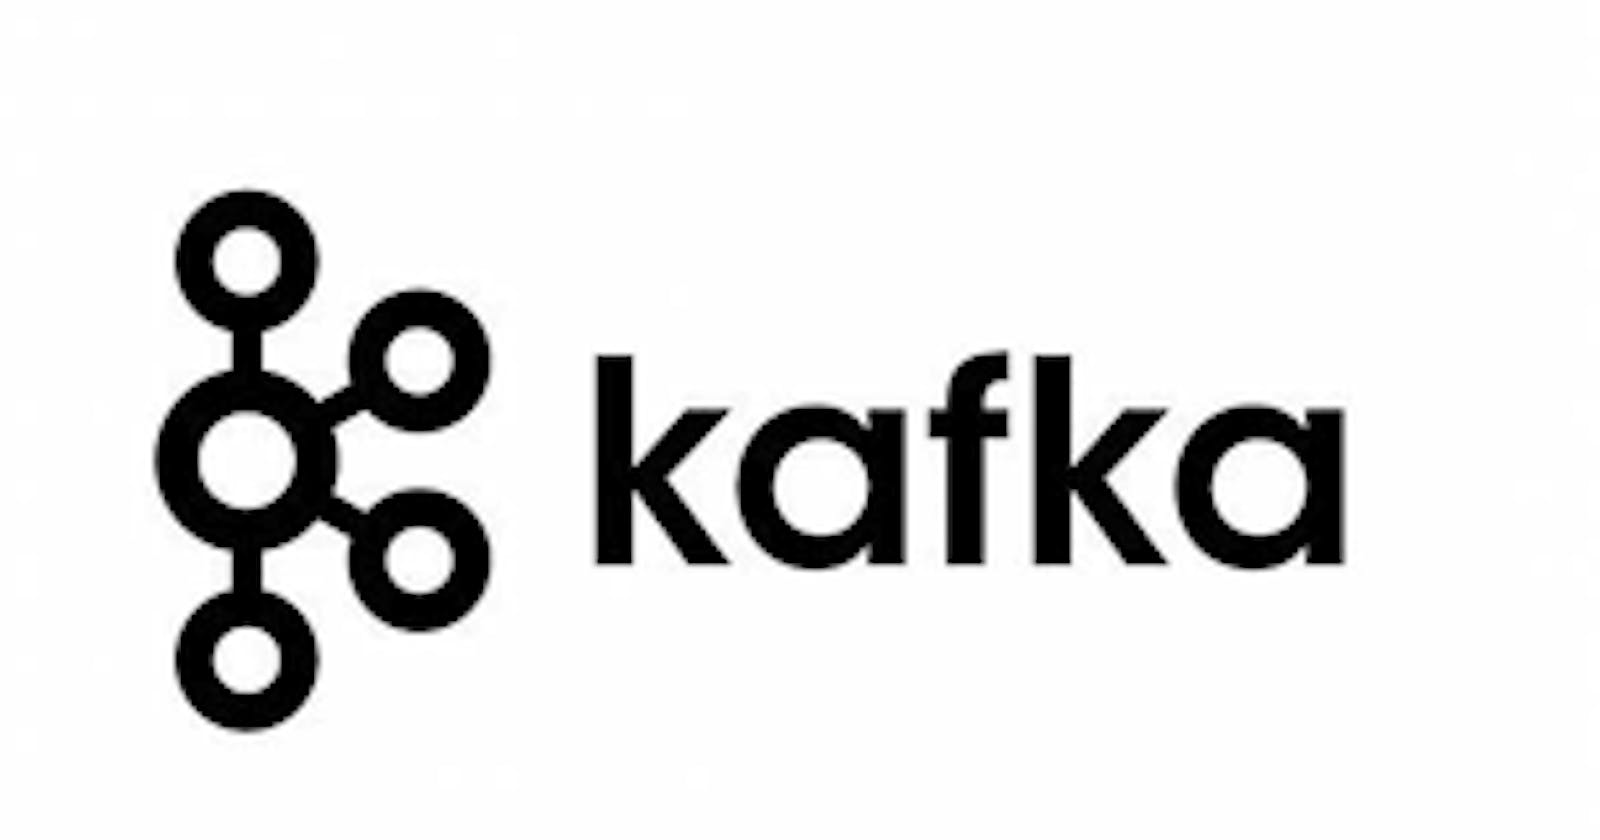 Basic usage of Kafka in an assessment project